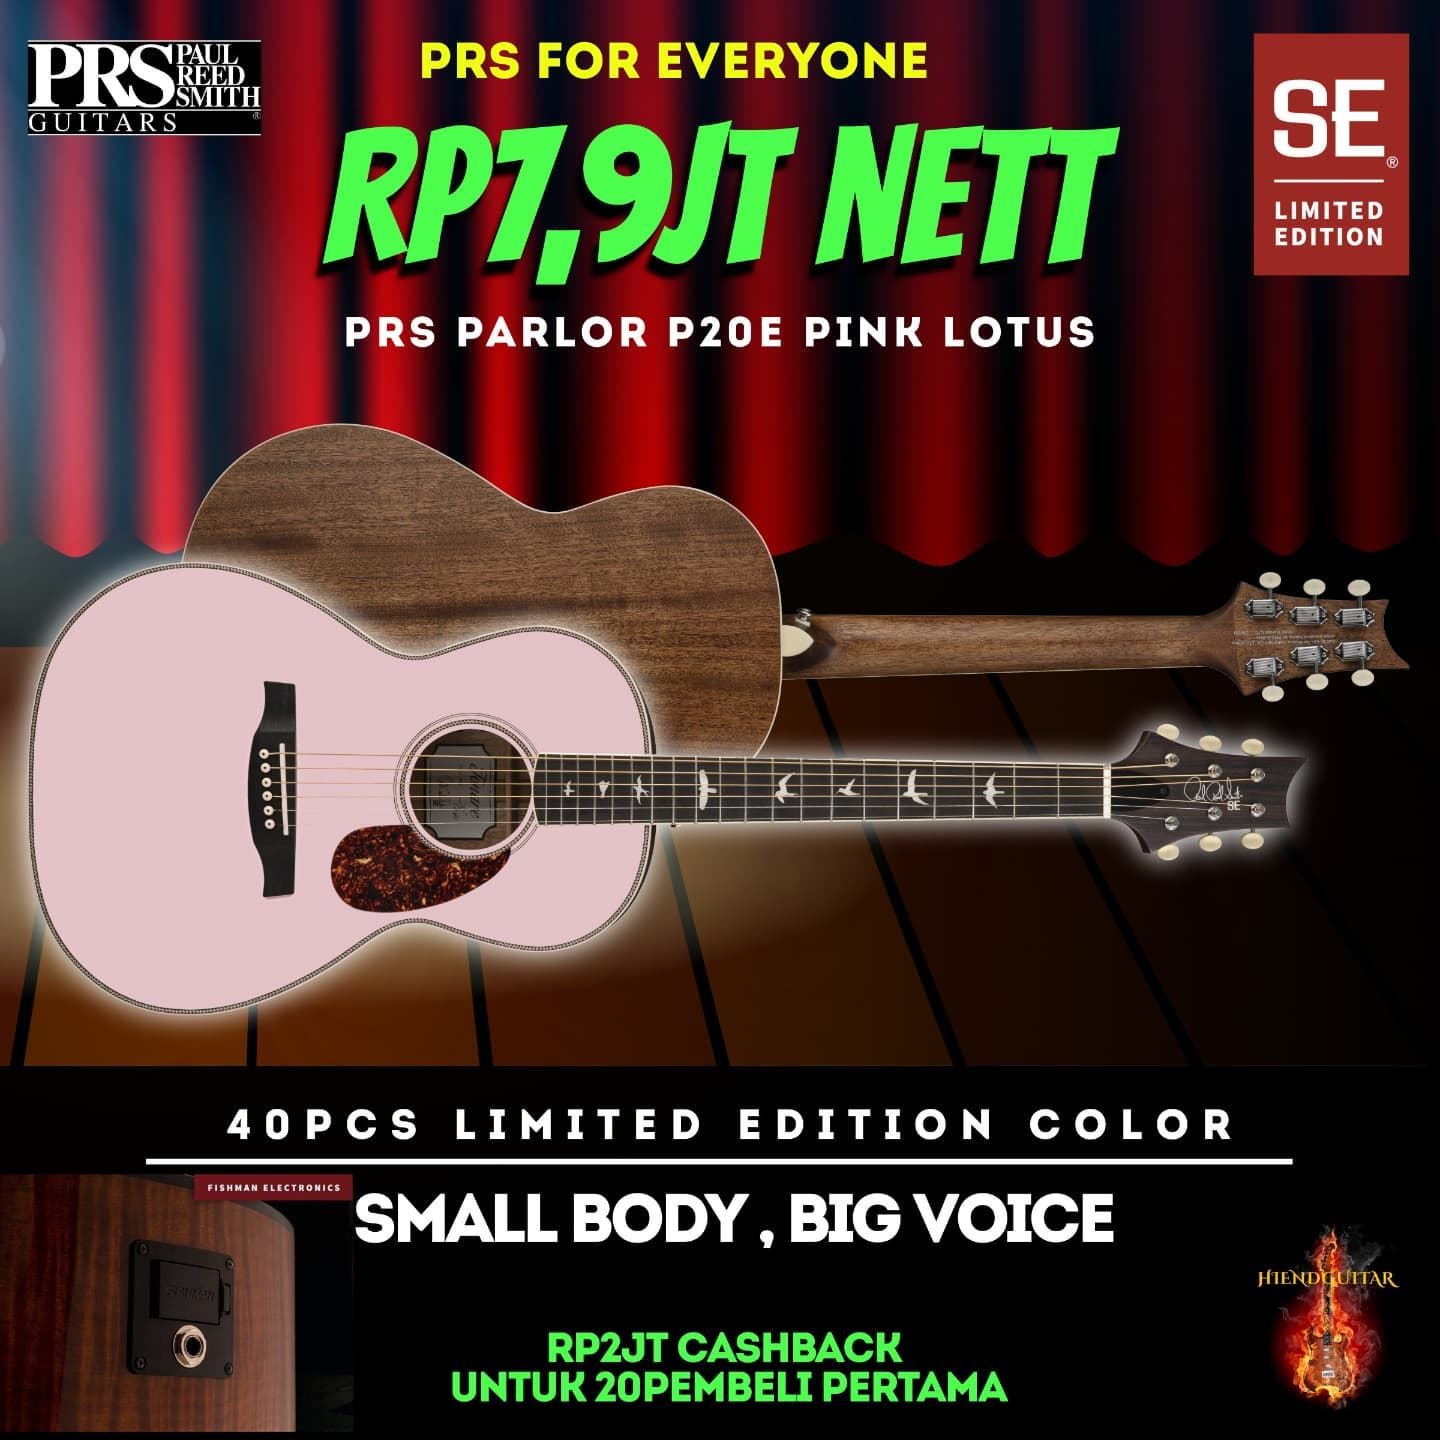 New Limited Edition PRS SE...